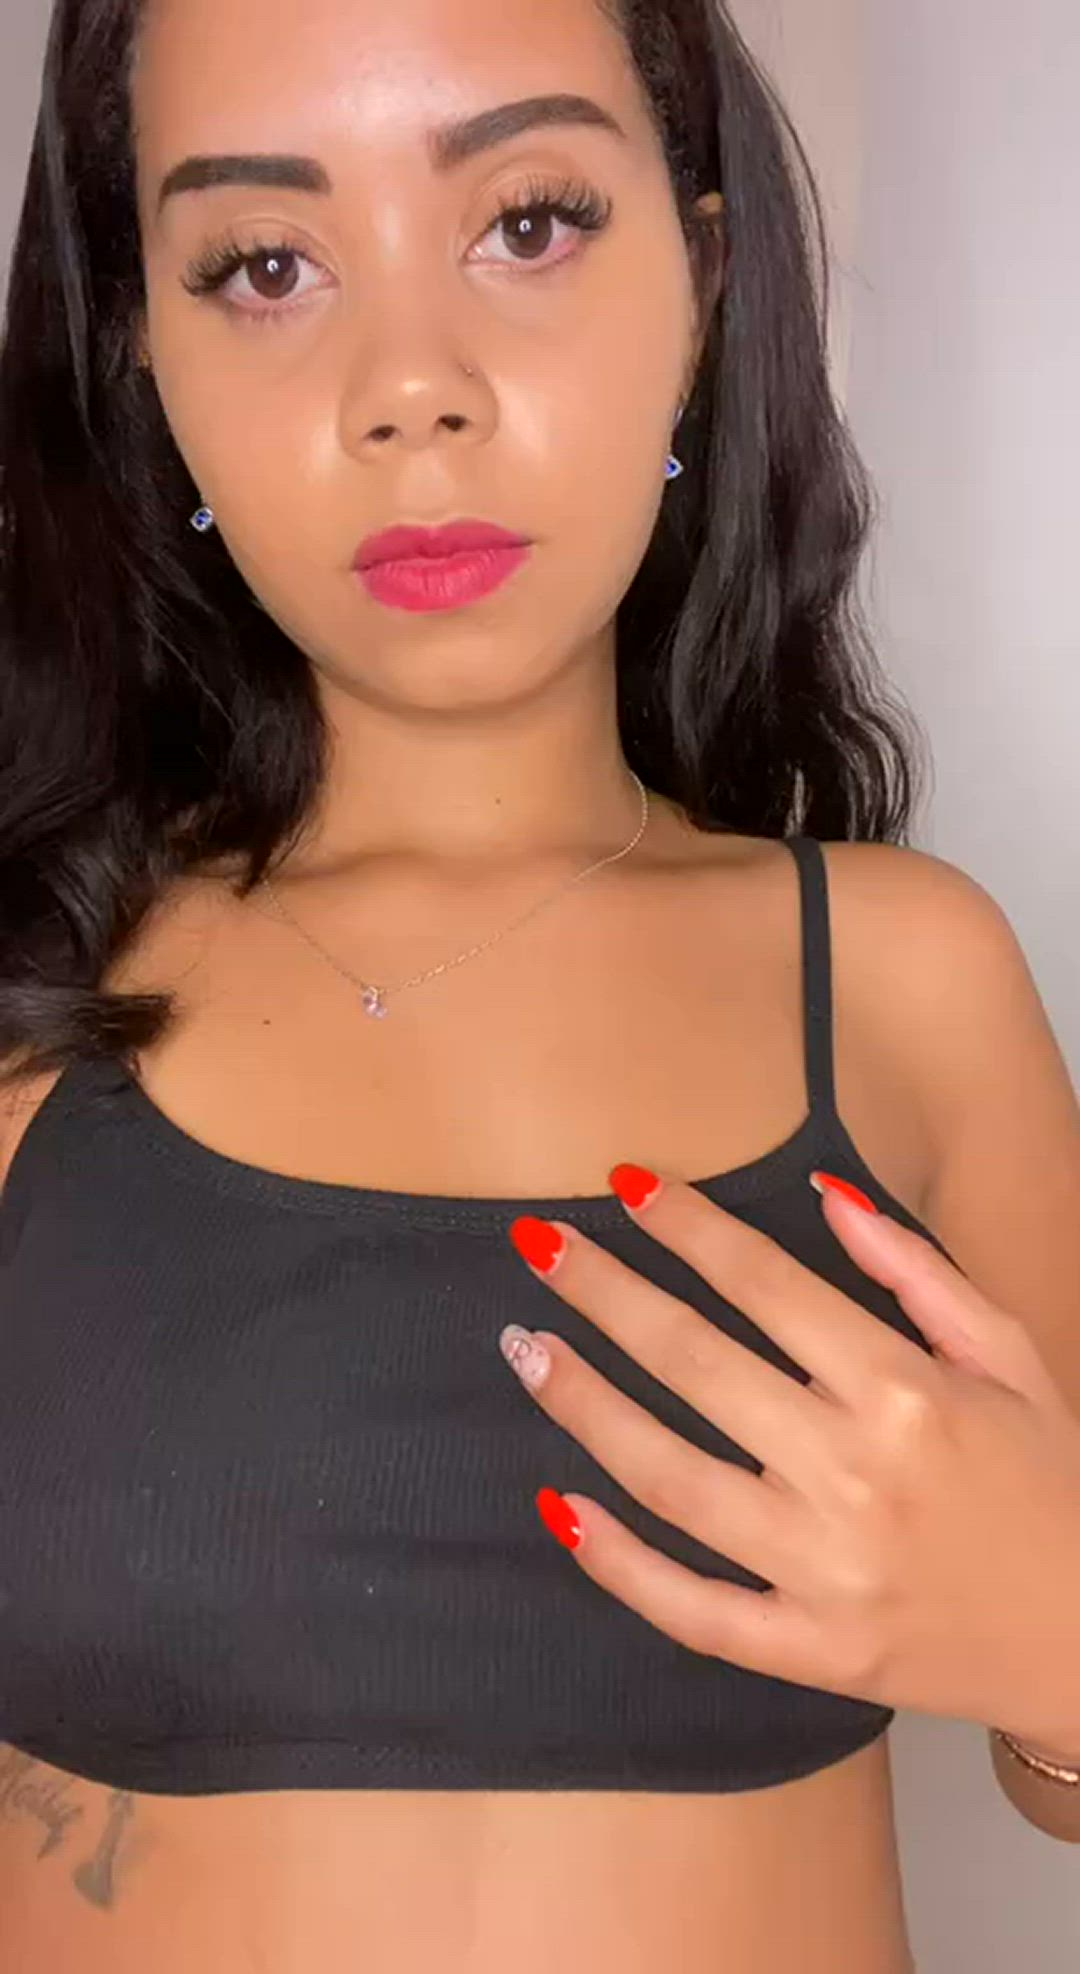 Fetish porn video with onlyfans model stefaaniaq <strong>@stefaaniaq</strong>